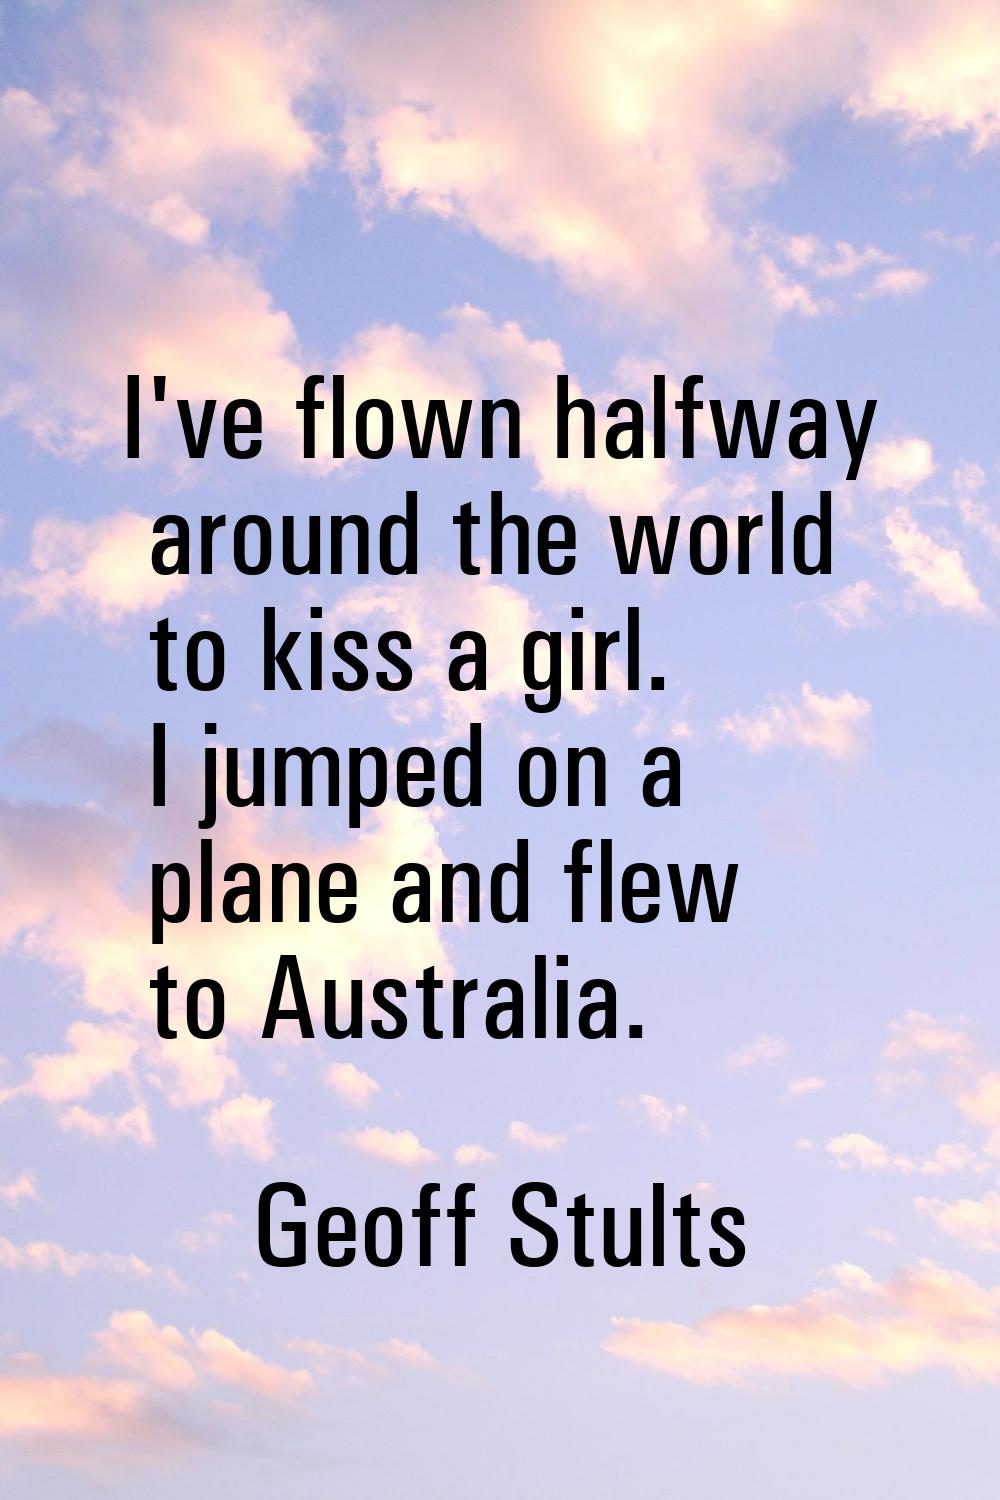 I've flown halfway around the world to kiss a girl. I jumped on a plane and flew to Australia.